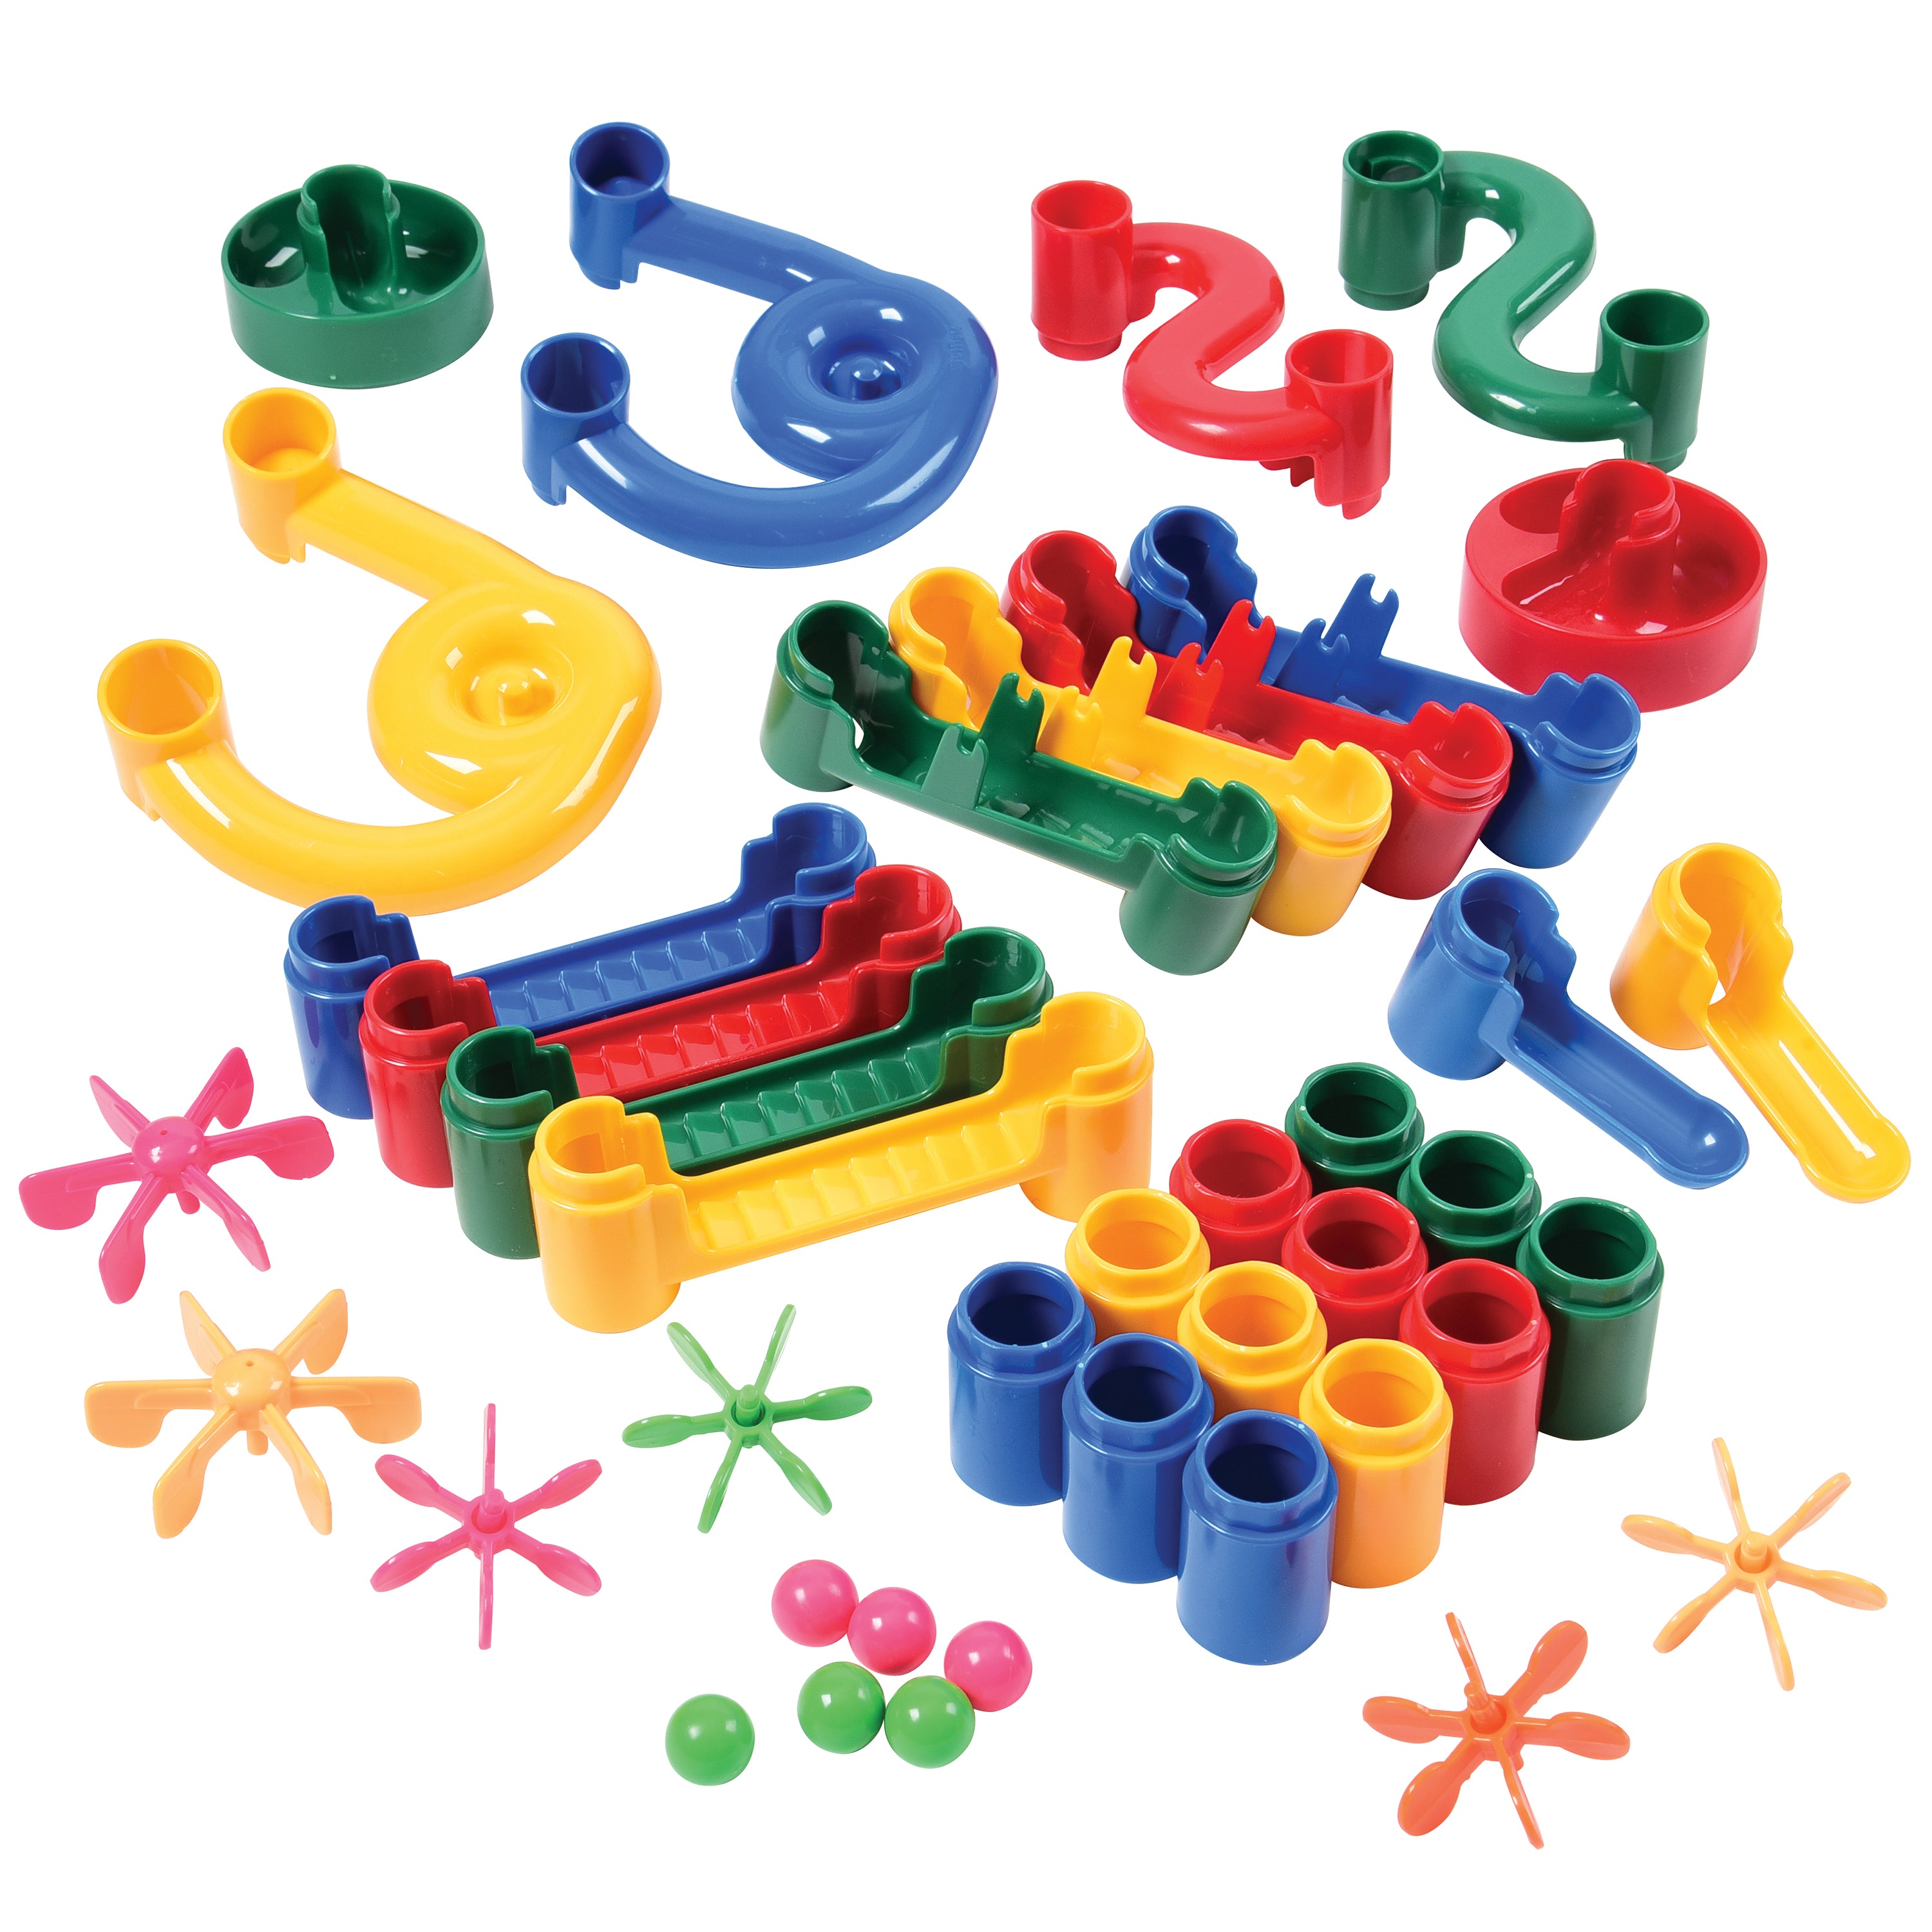 Accessories for Marble Run